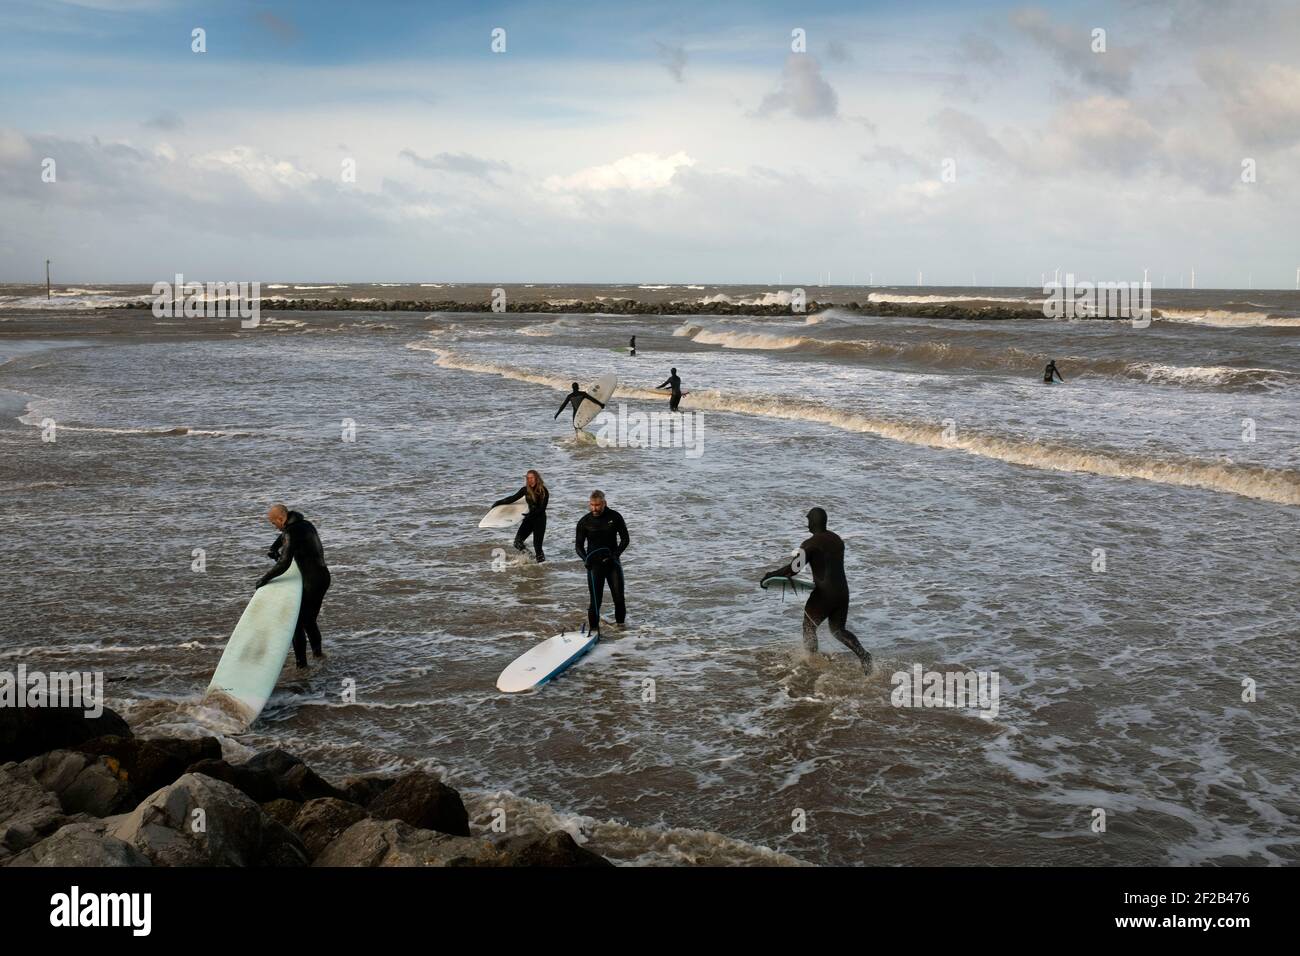 A group of surfers in the sea in the mouth of the river Mersey. High tides and a storm which swept across the United Kingdom brought favourable conditions for surfing in Leasowe Bay, Merseyside on 11 March, 2021. Stock Photo